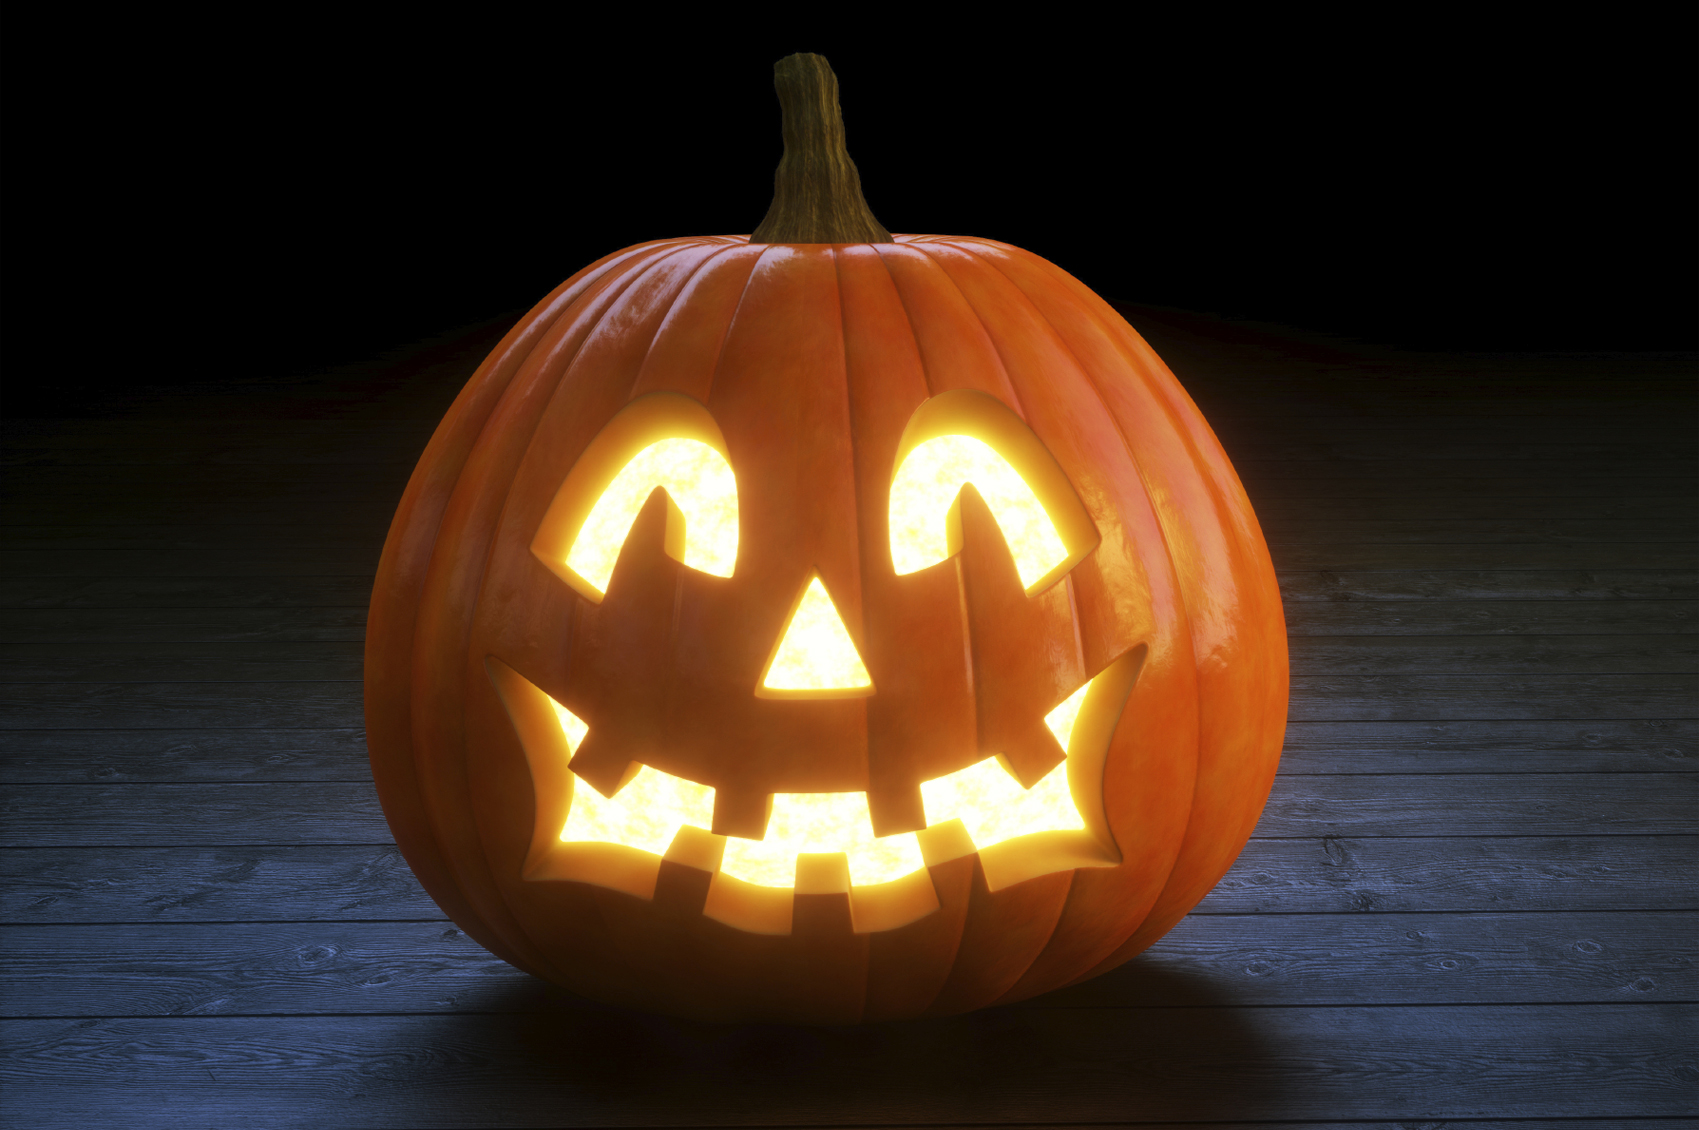 Should Christians take part in Halloween celebrations? | The Good Book Blog